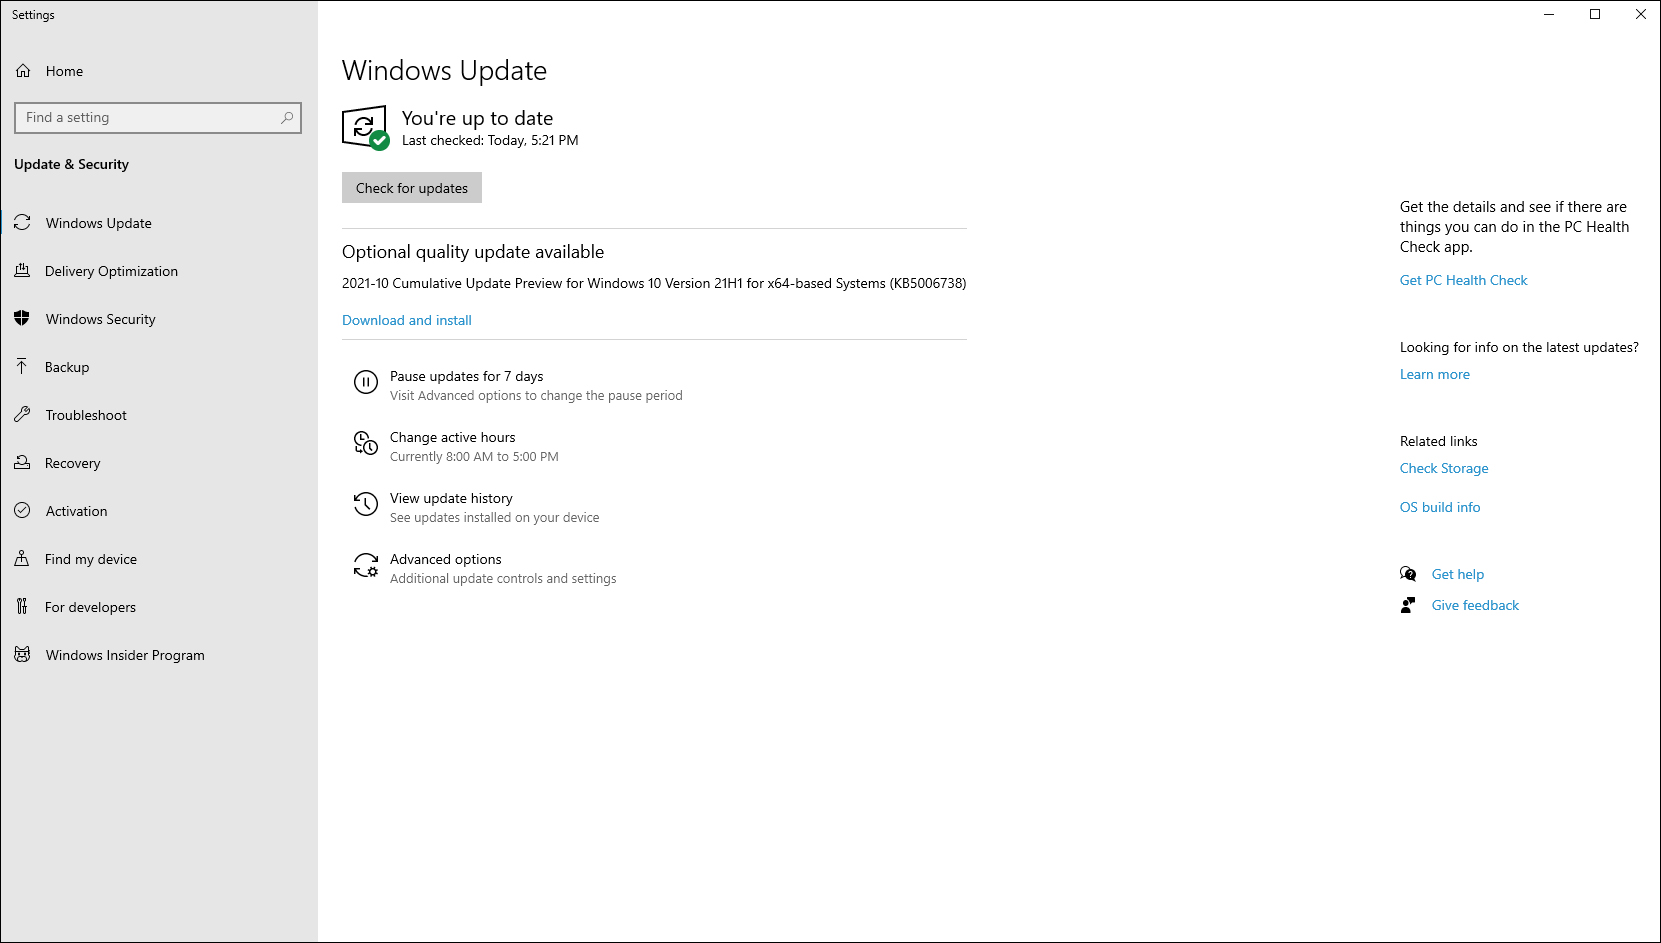 How to check for updates in Windows 10.